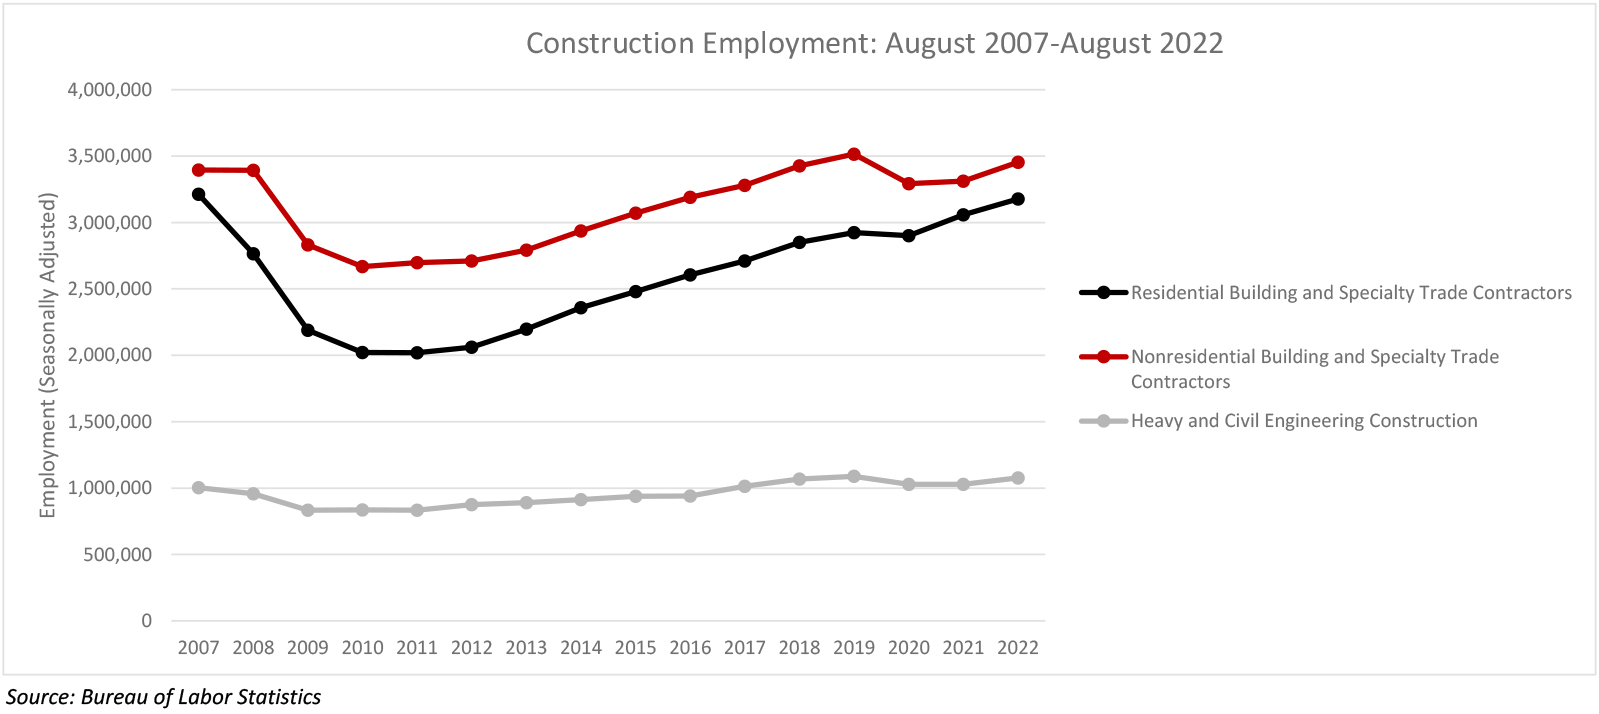 Nonresidential Construction Adds 4,300 Jobs in August